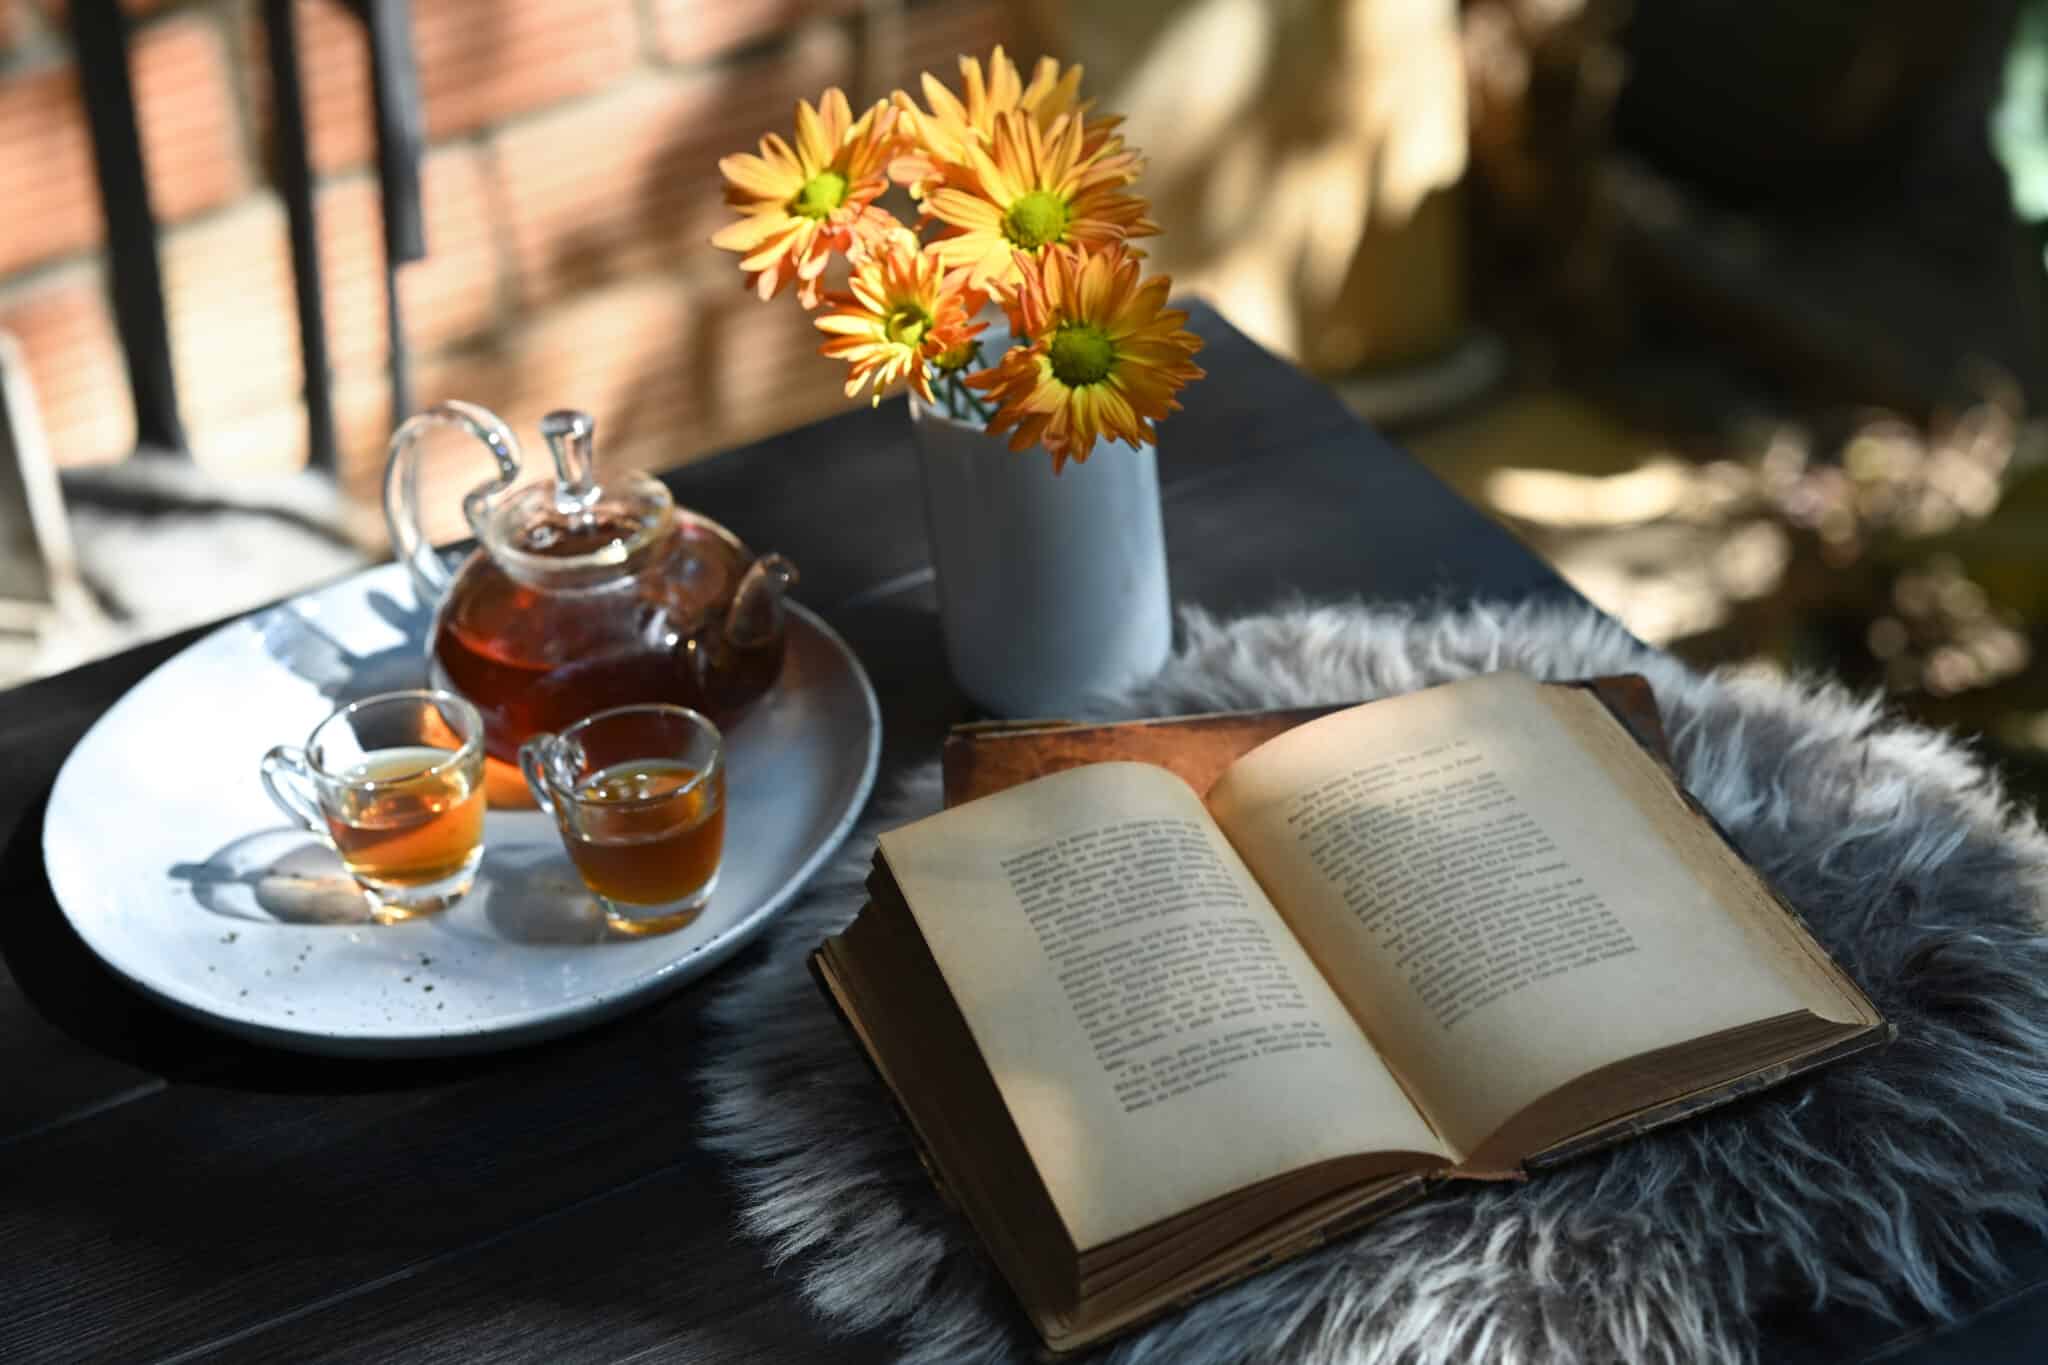 Tea set of cups and teapot with fresh tea, book and flower pot on wooden table with sunlight